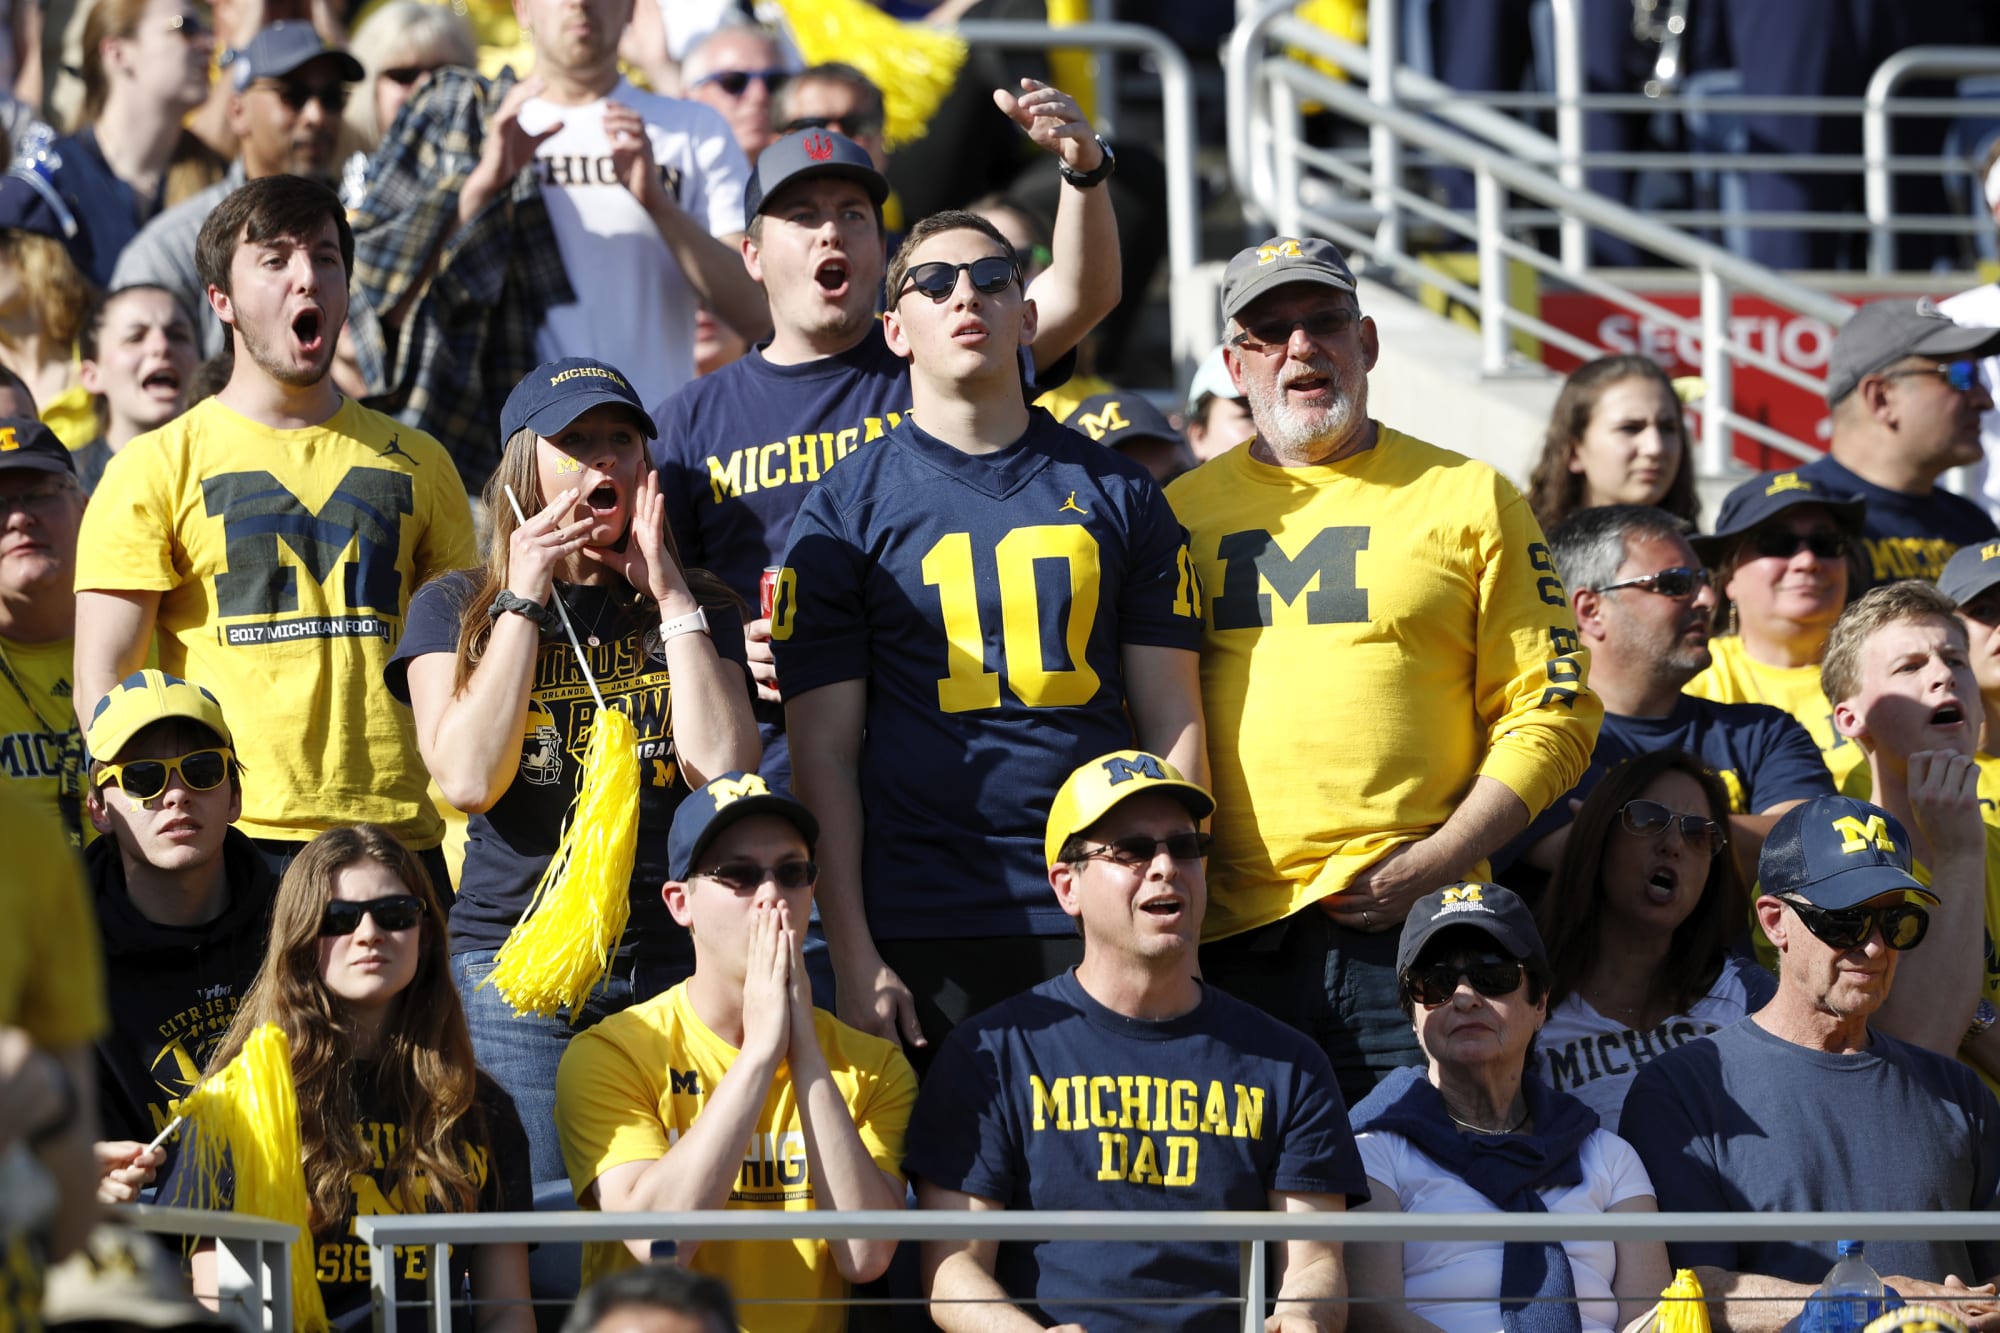 Michigan football fans react to Ohio State's performance in National.